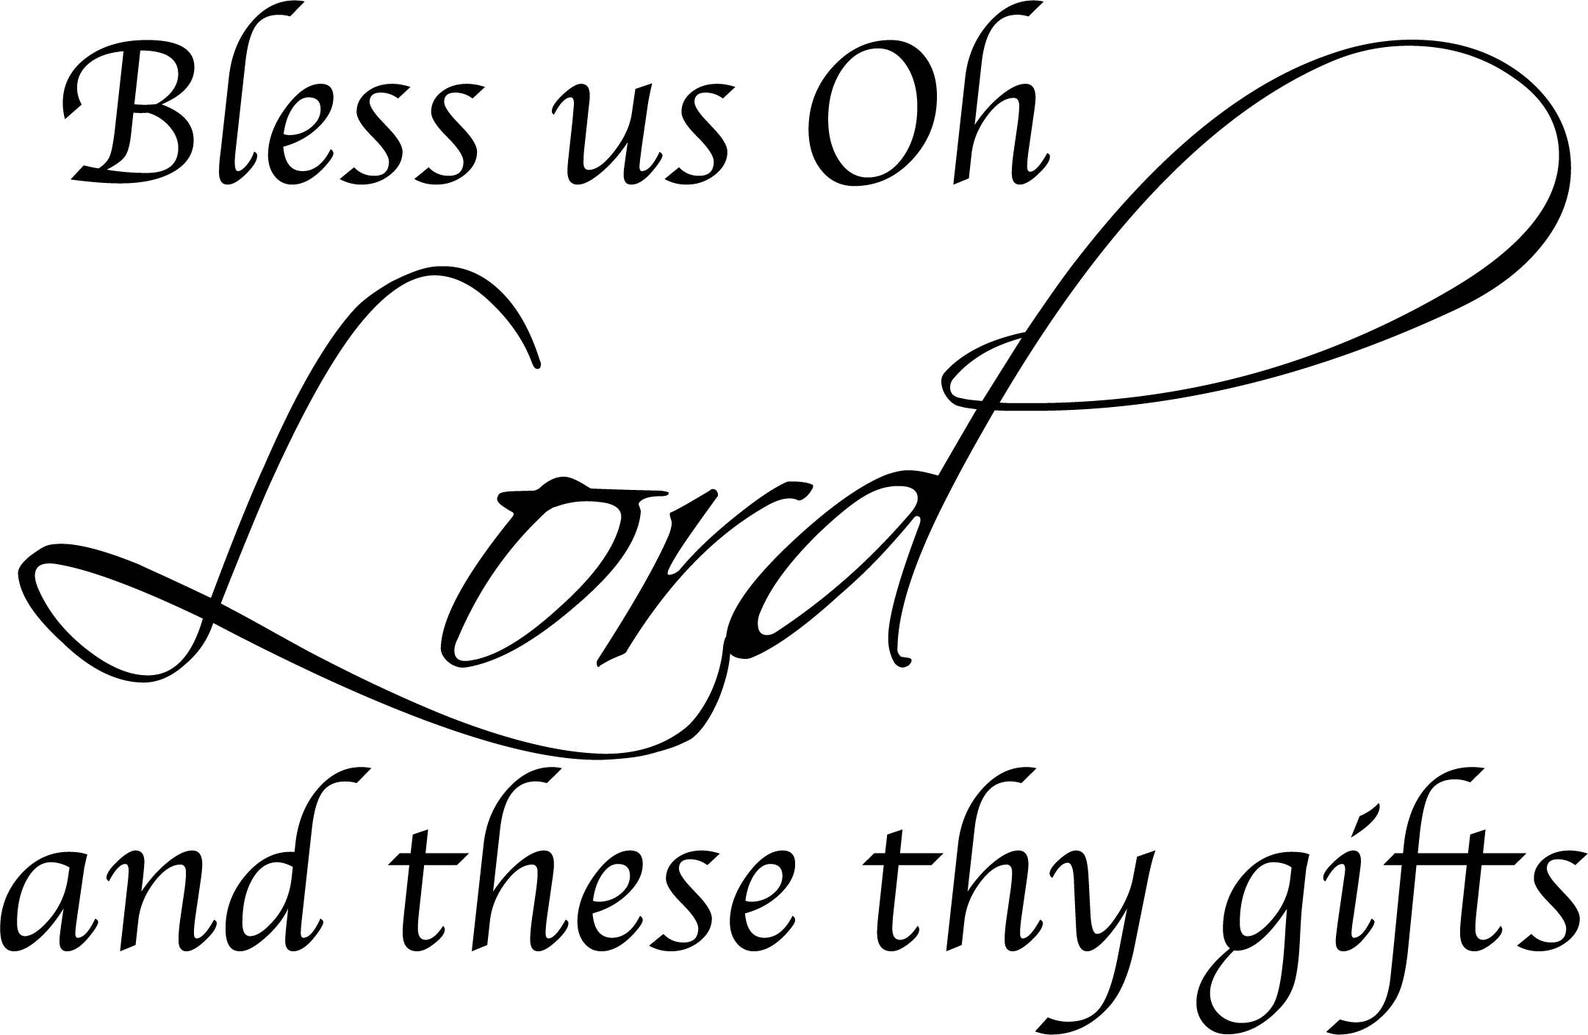 Bless Us Oh Lord and These Thy Gifts 2 Printable wall art